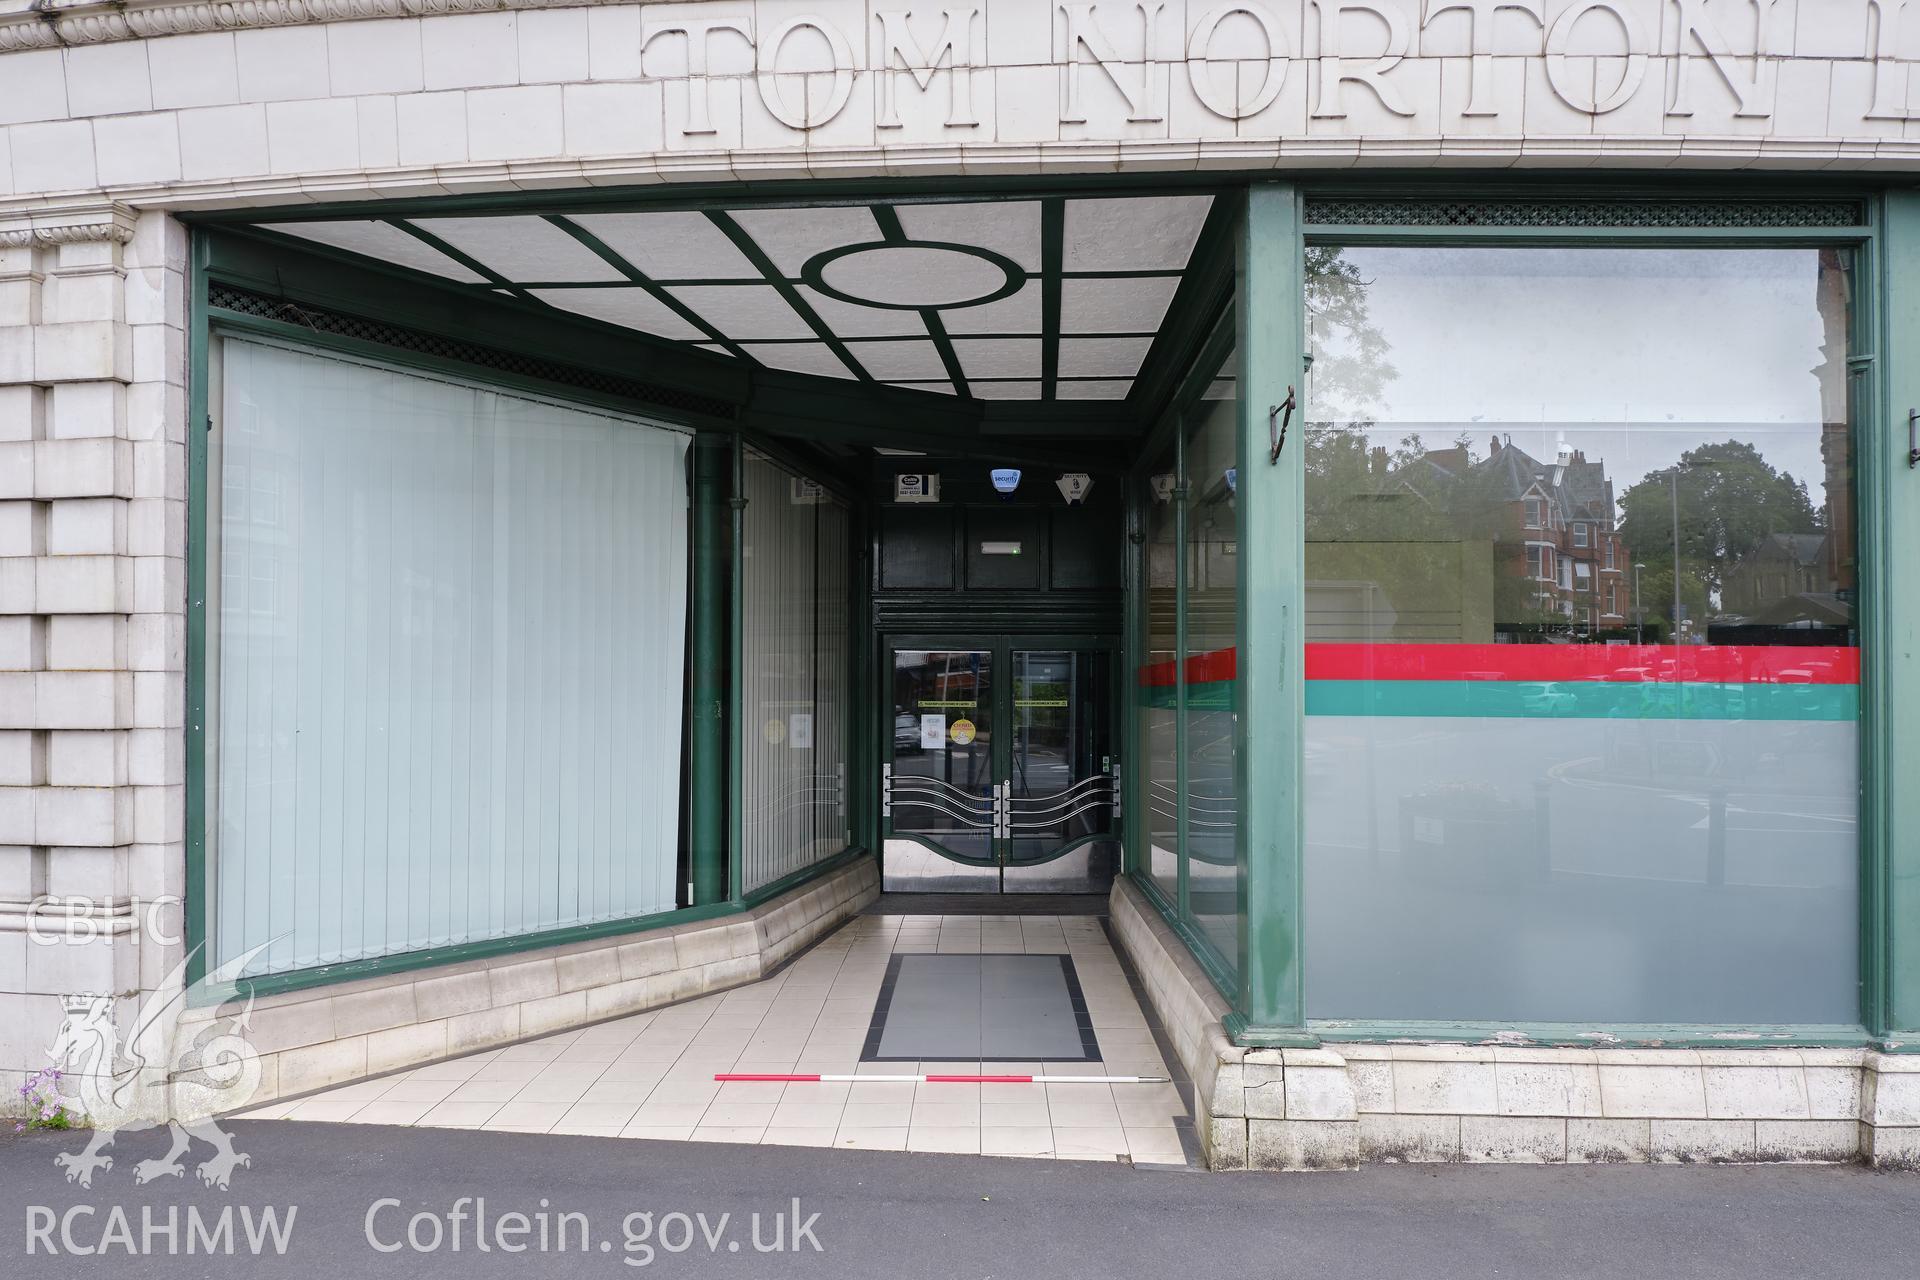 Colour photograph showing Automobile Palace - 2 bay entrance from Temple Street, looking SE. Produced as part of Historic Building Recording for Automobile Palace, carried out by Richard Hayman, June 2021.